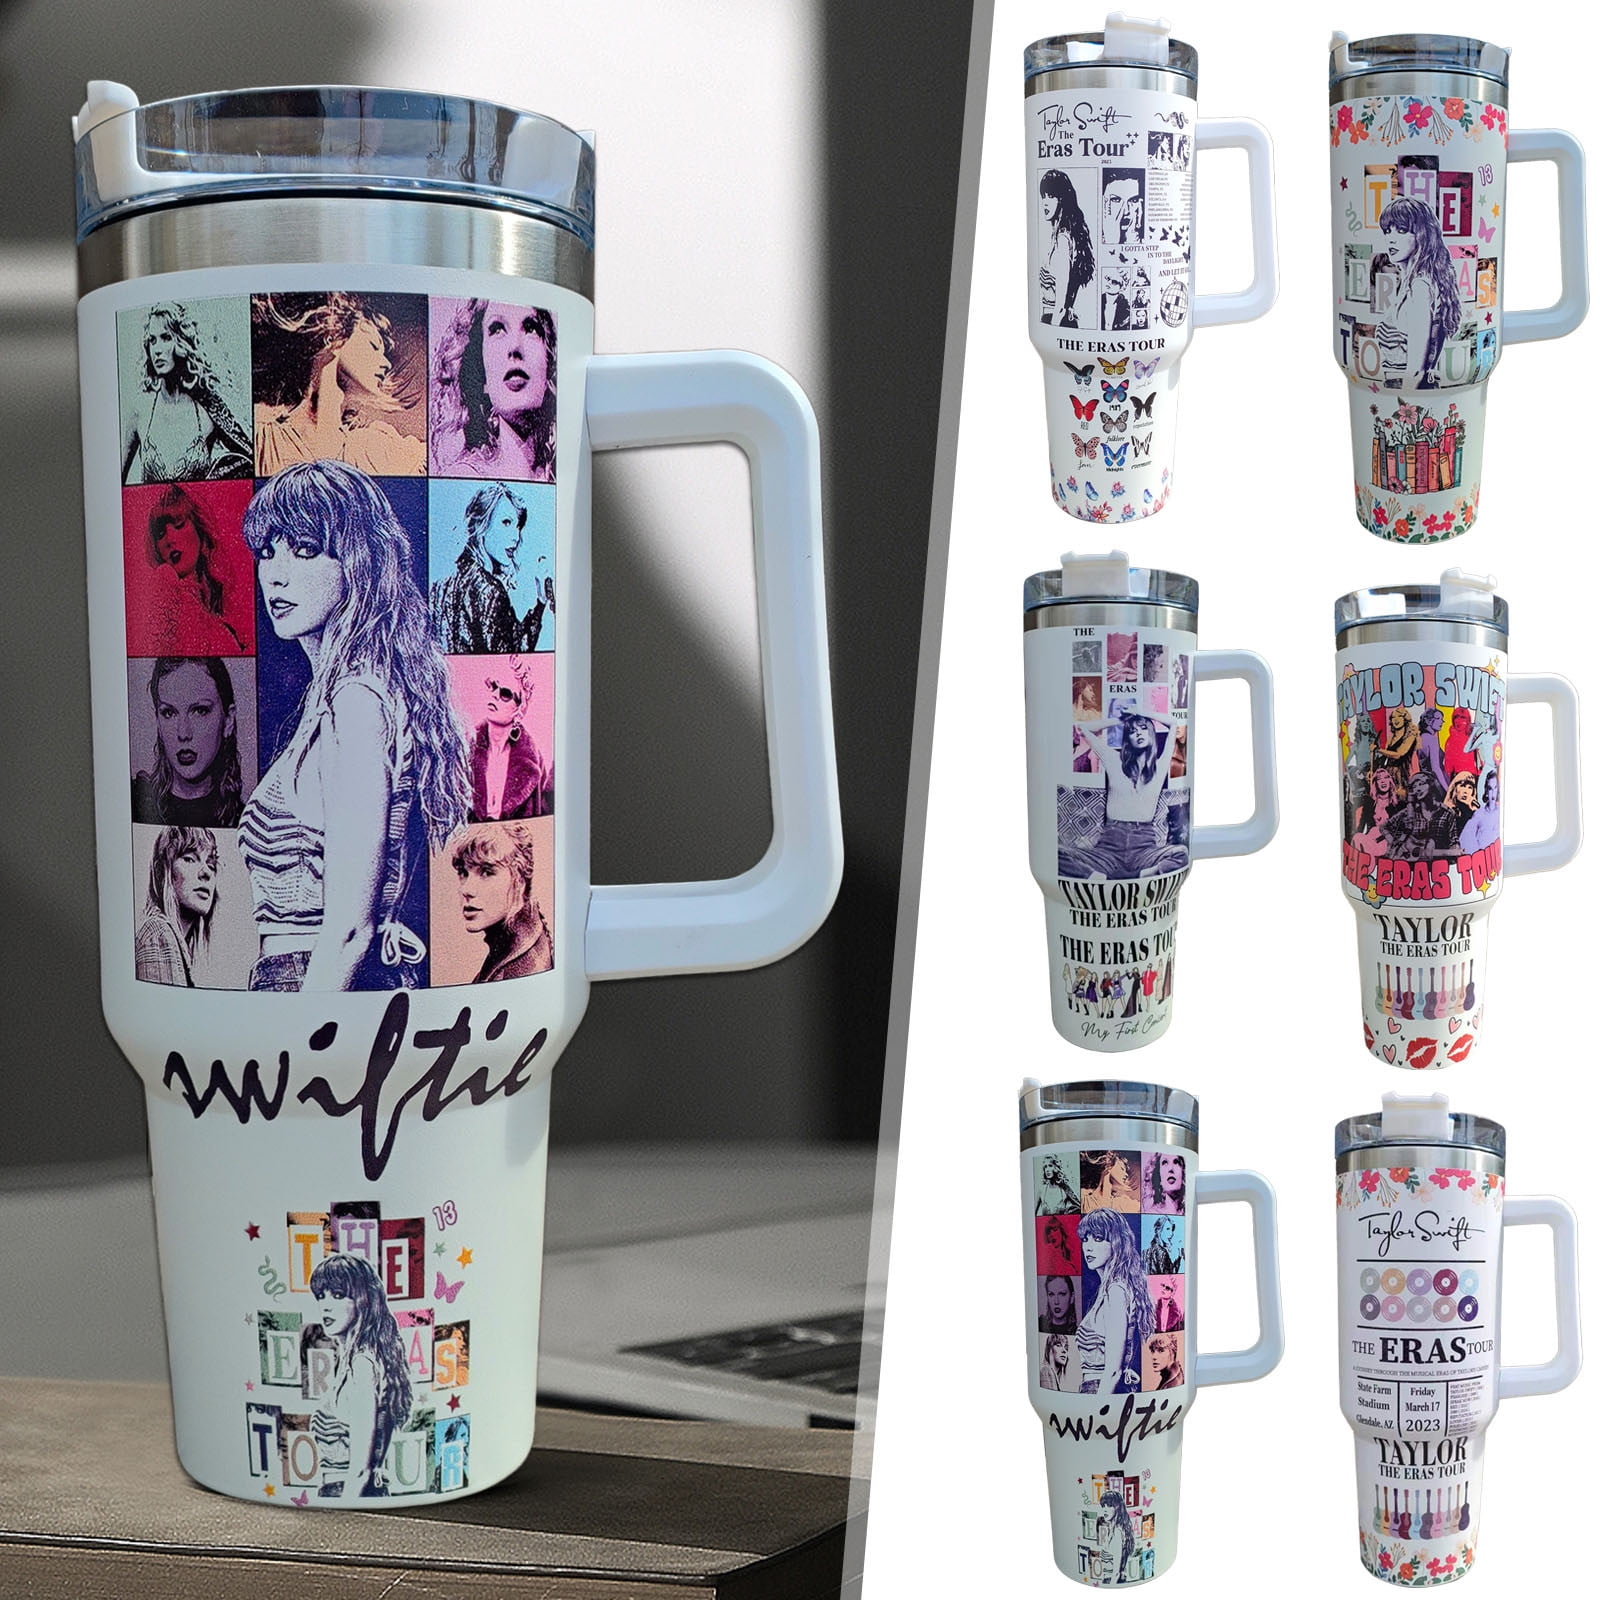 Taylor Swift Midnights Tea Cup Set – Taylor Swift Official Store